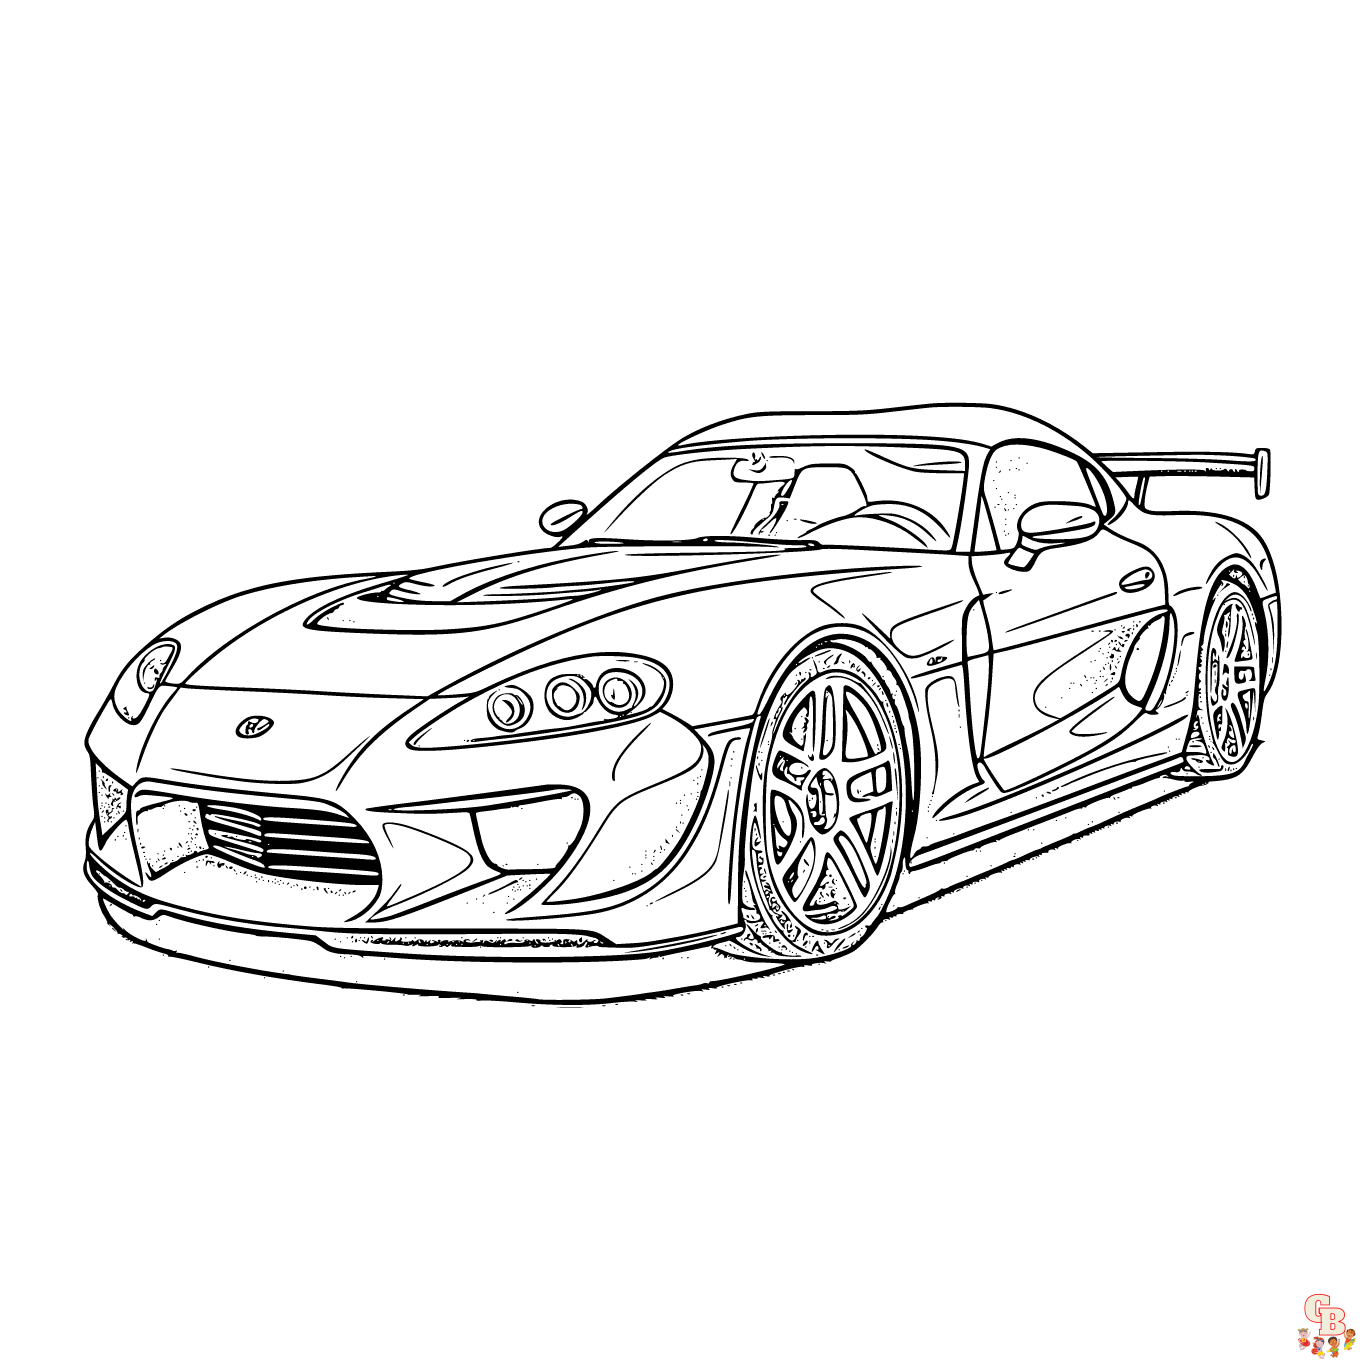 dodge viper coloring pages